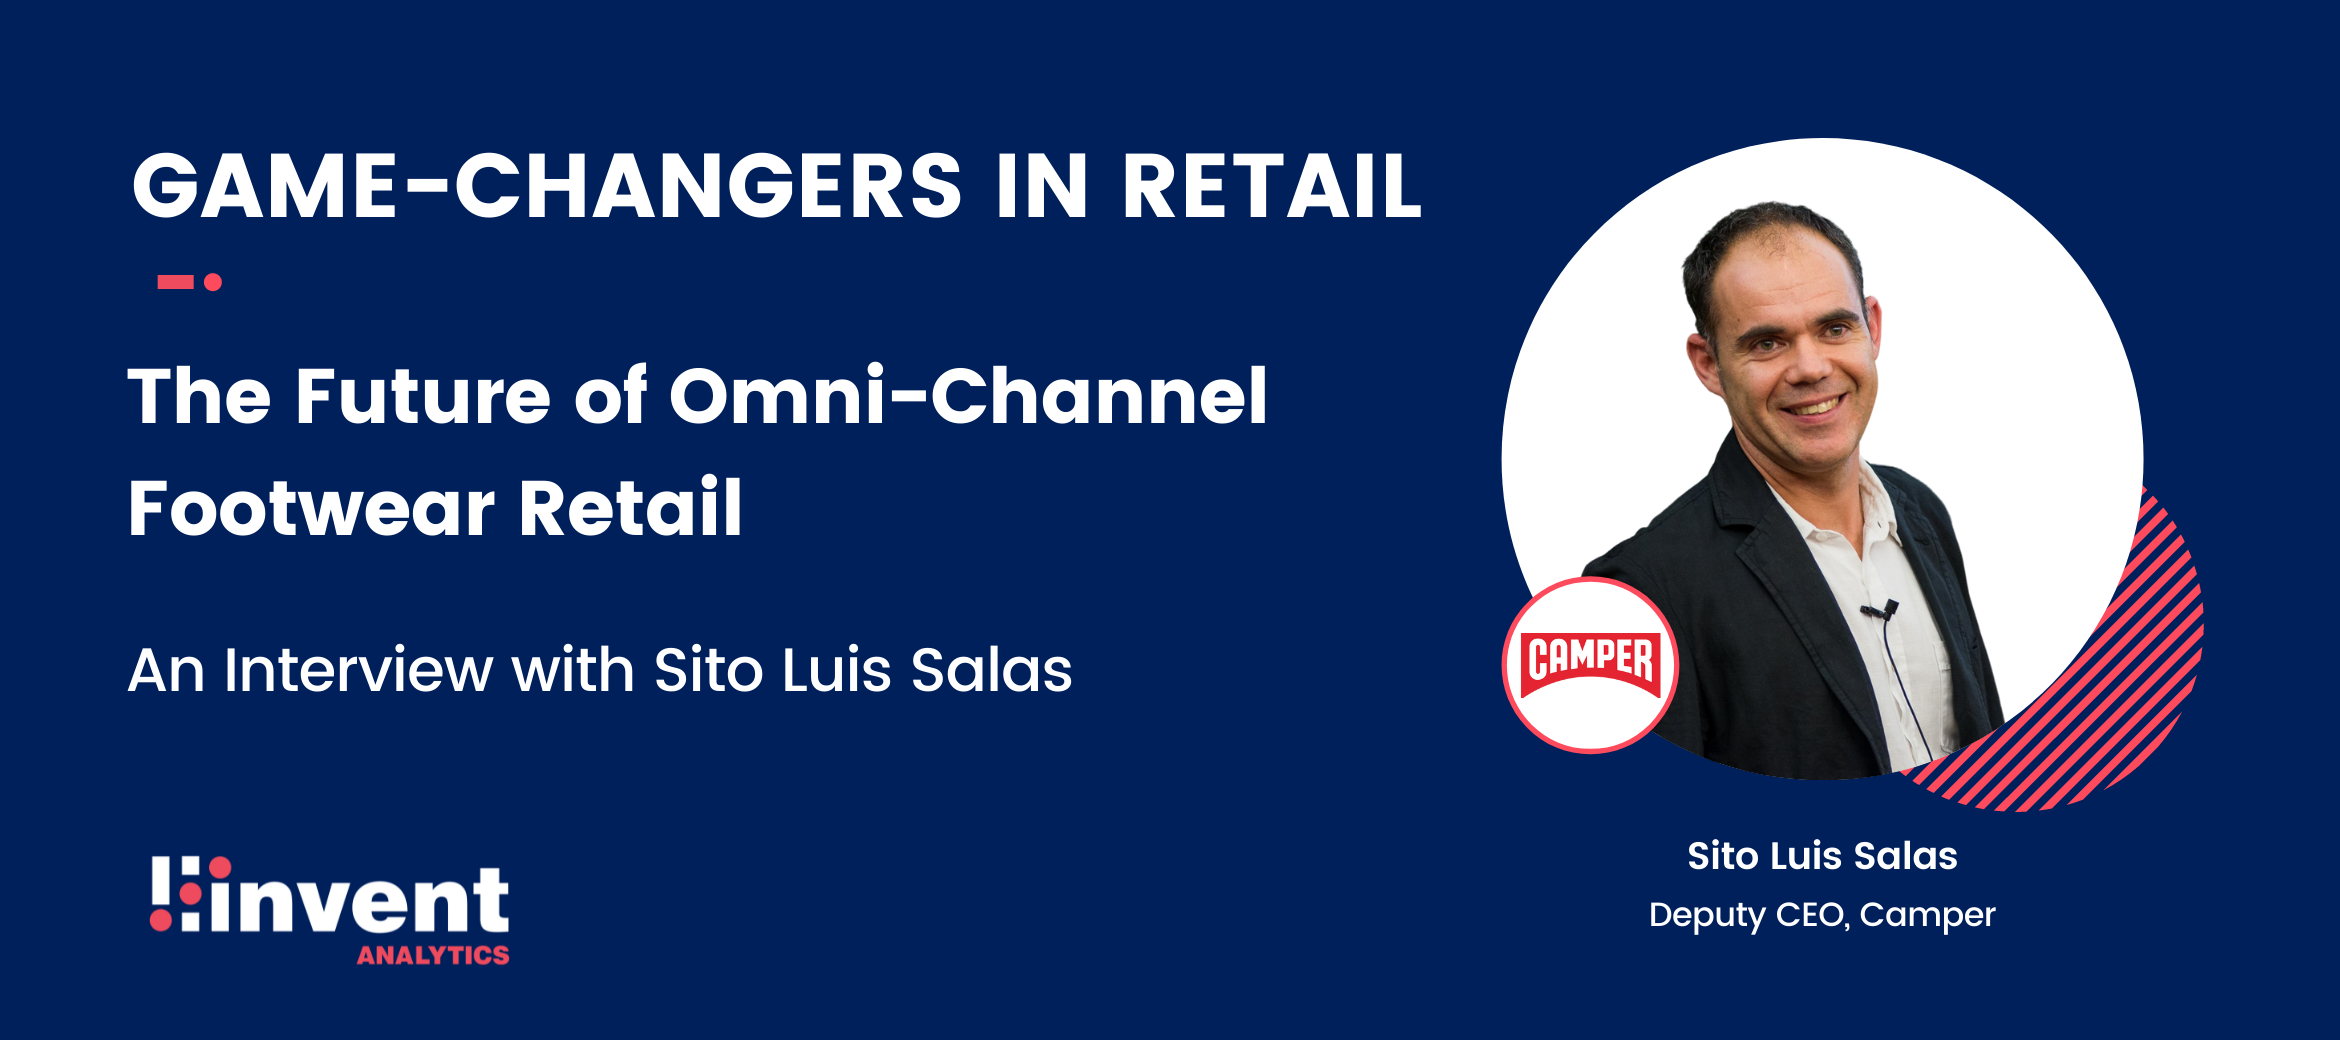 Gamechangers in Retail Sito Luis Camper